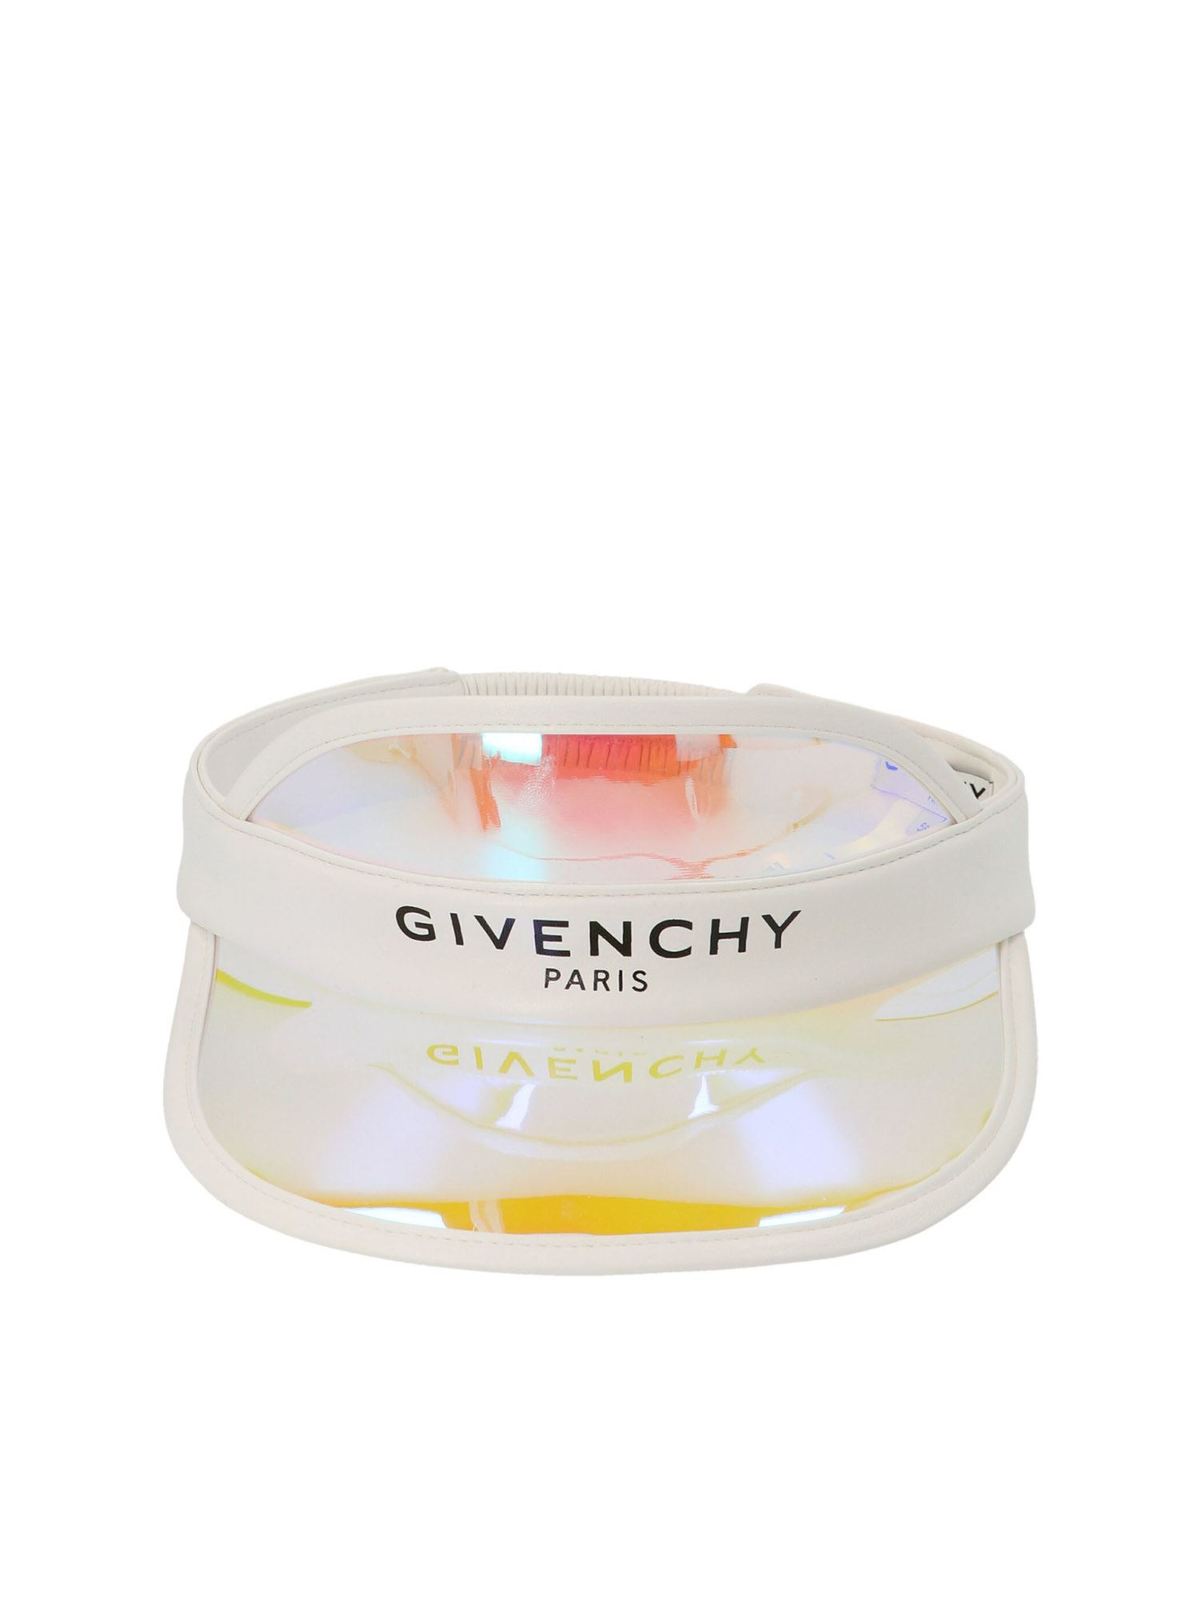 Hats & caps Givenchy - Holographic visor - H11013BIAMCO